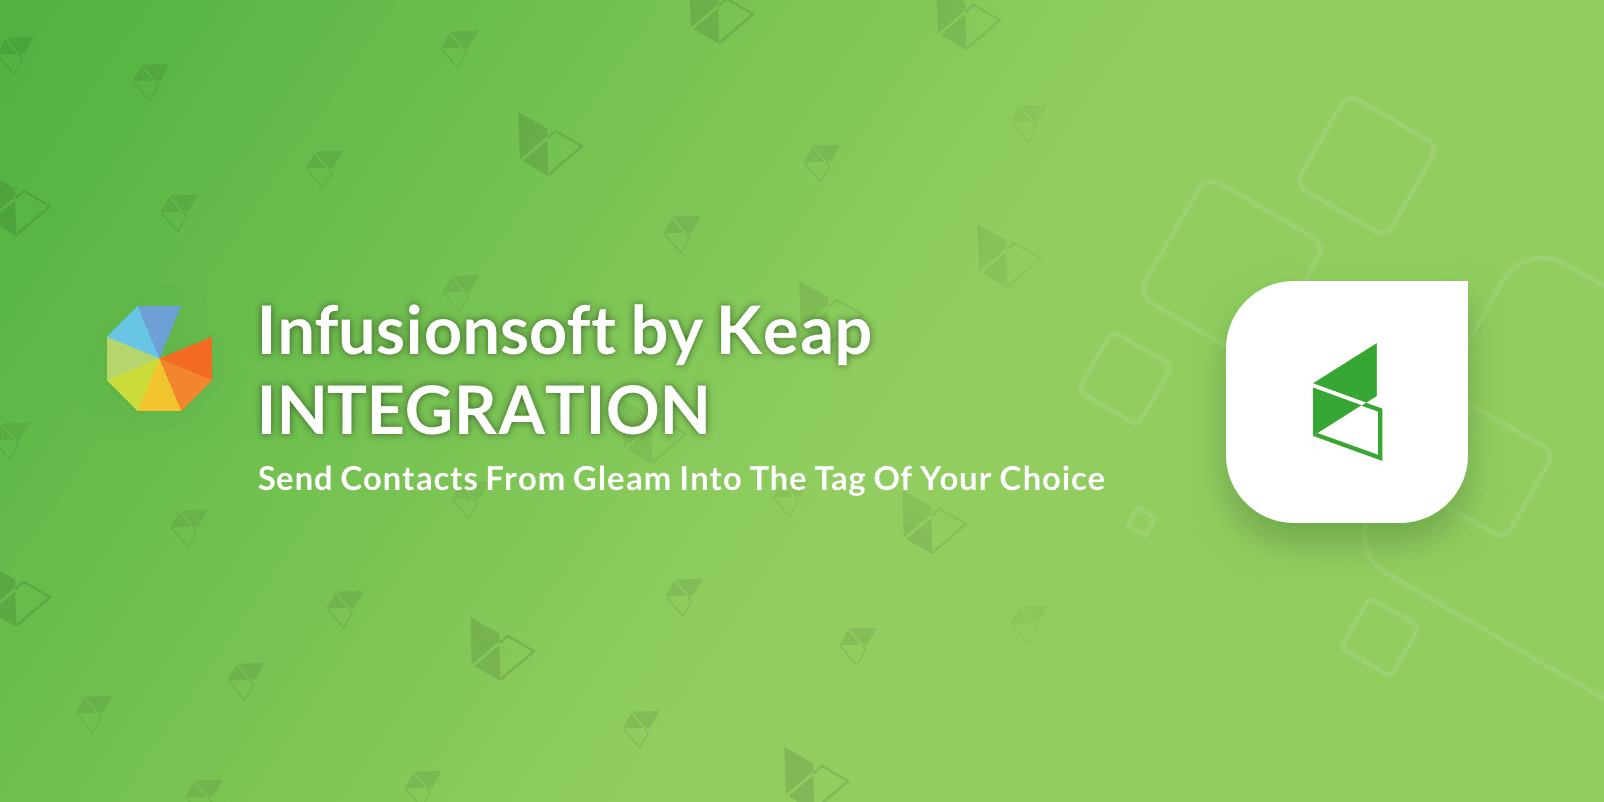 Infusionsoft by Keap integration setup instructions for Gleam